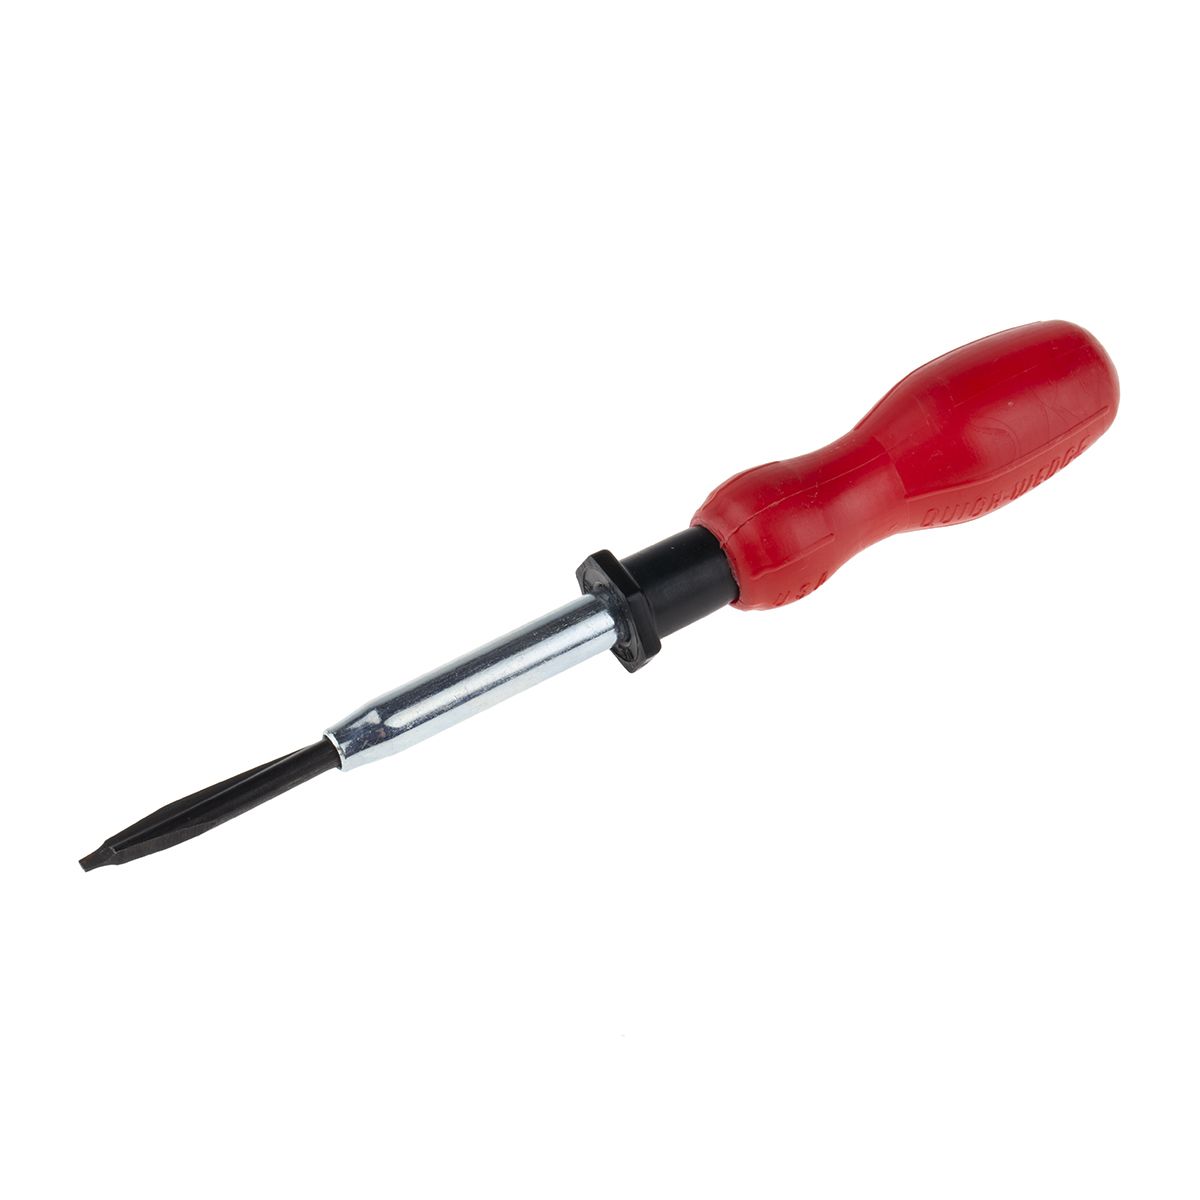 RS PRO Flat Gripping Driver Screwdriver 0.5 mm Tip